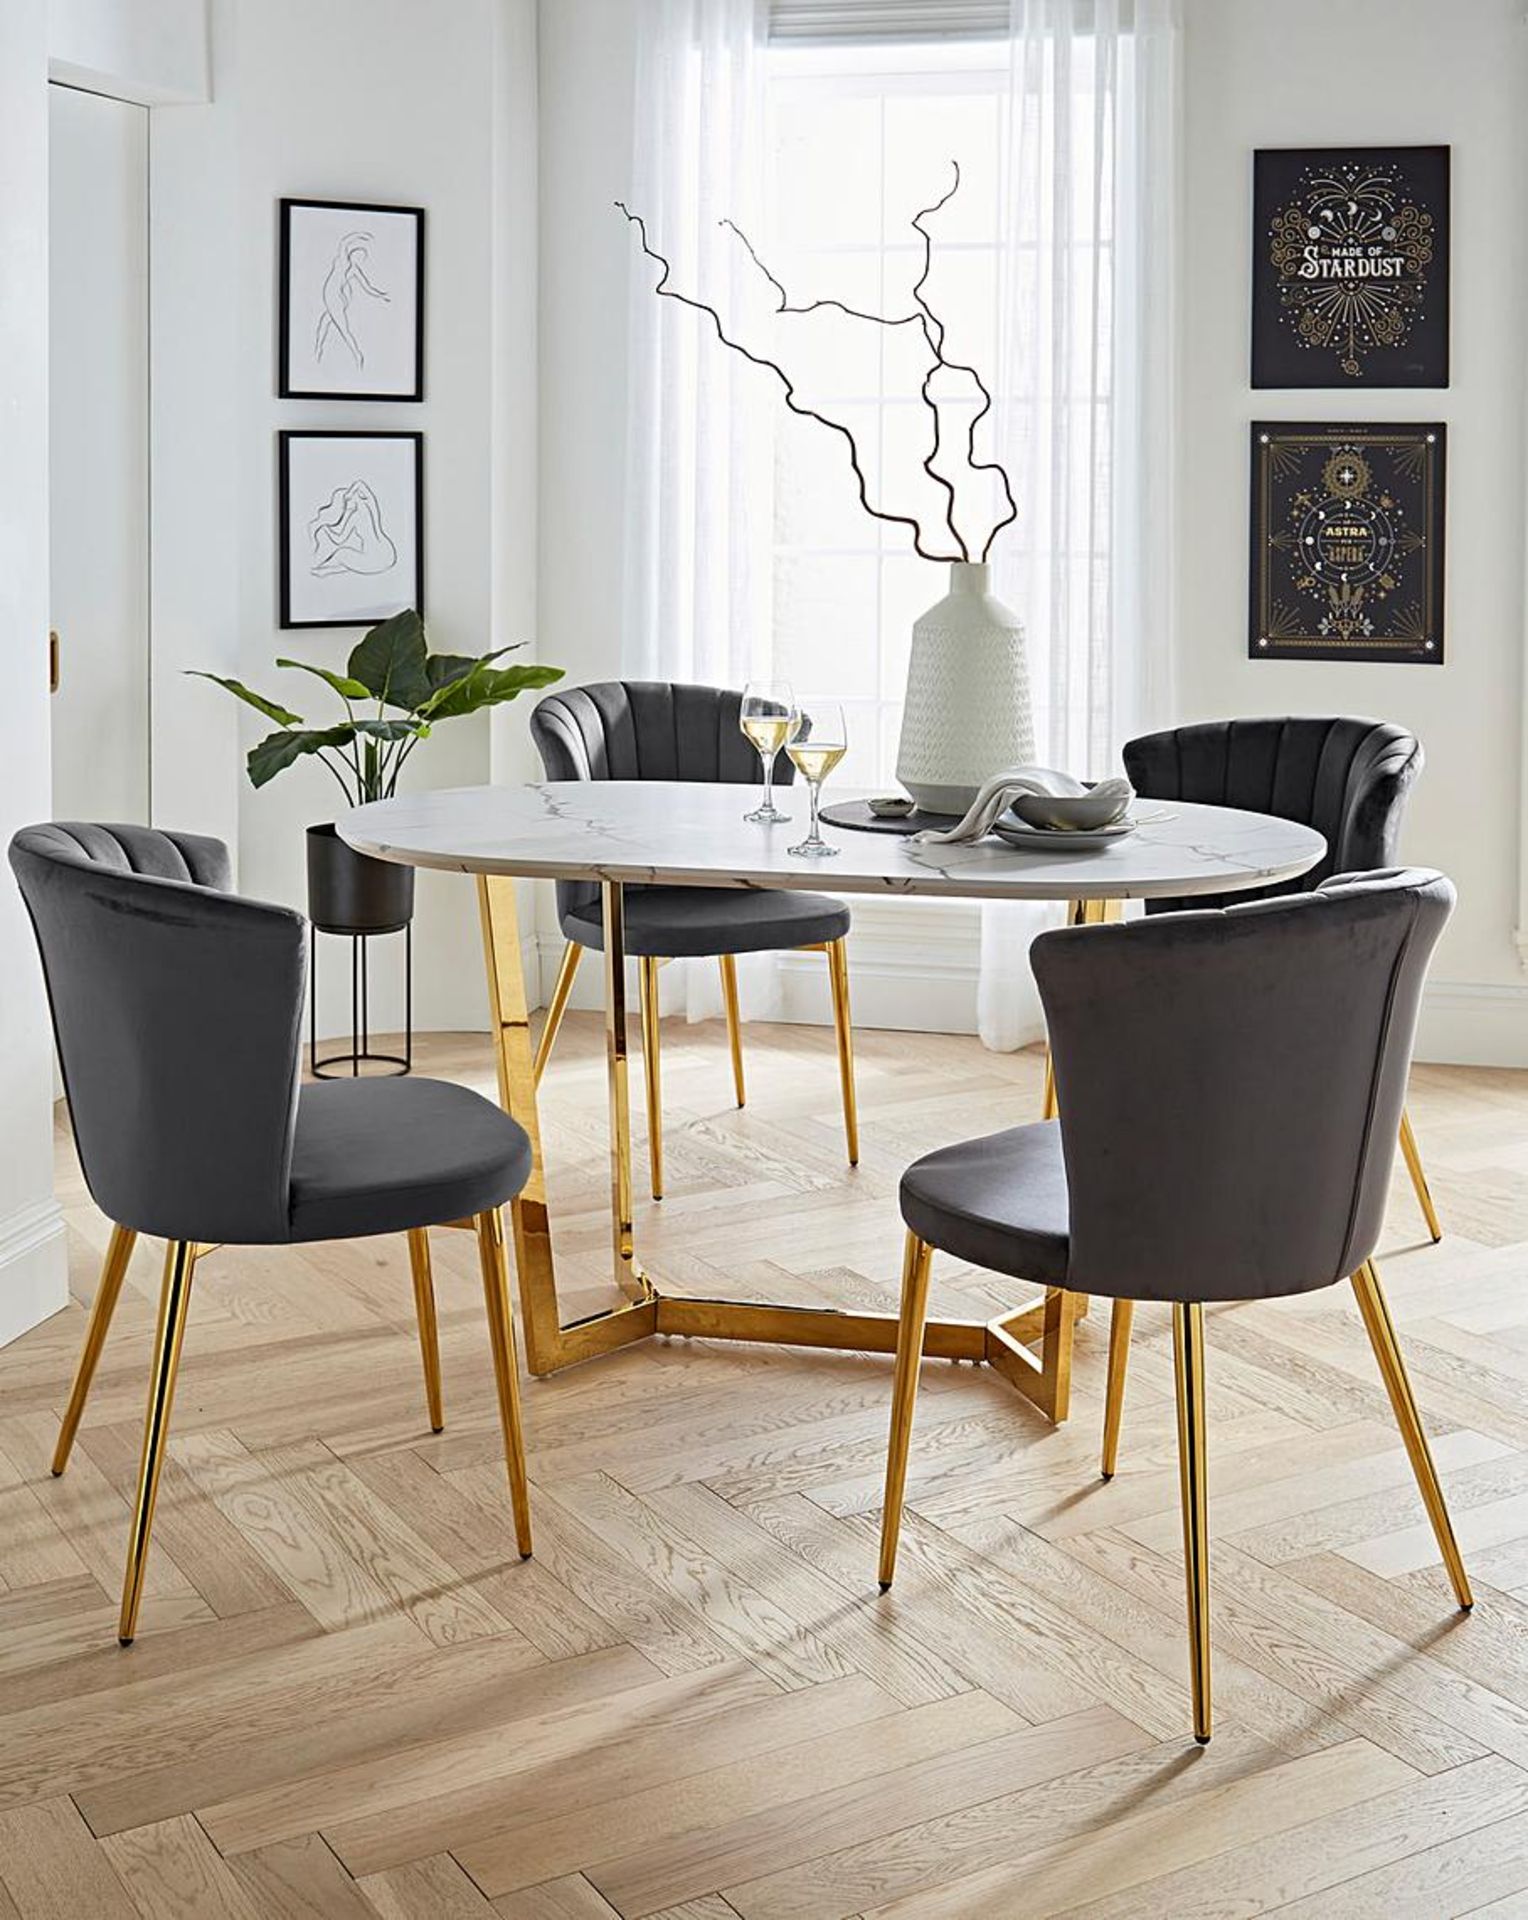 Joanna Hope Florence Oval Dining Table. RRP £649.00. An opulent dining range, the Florence Oval